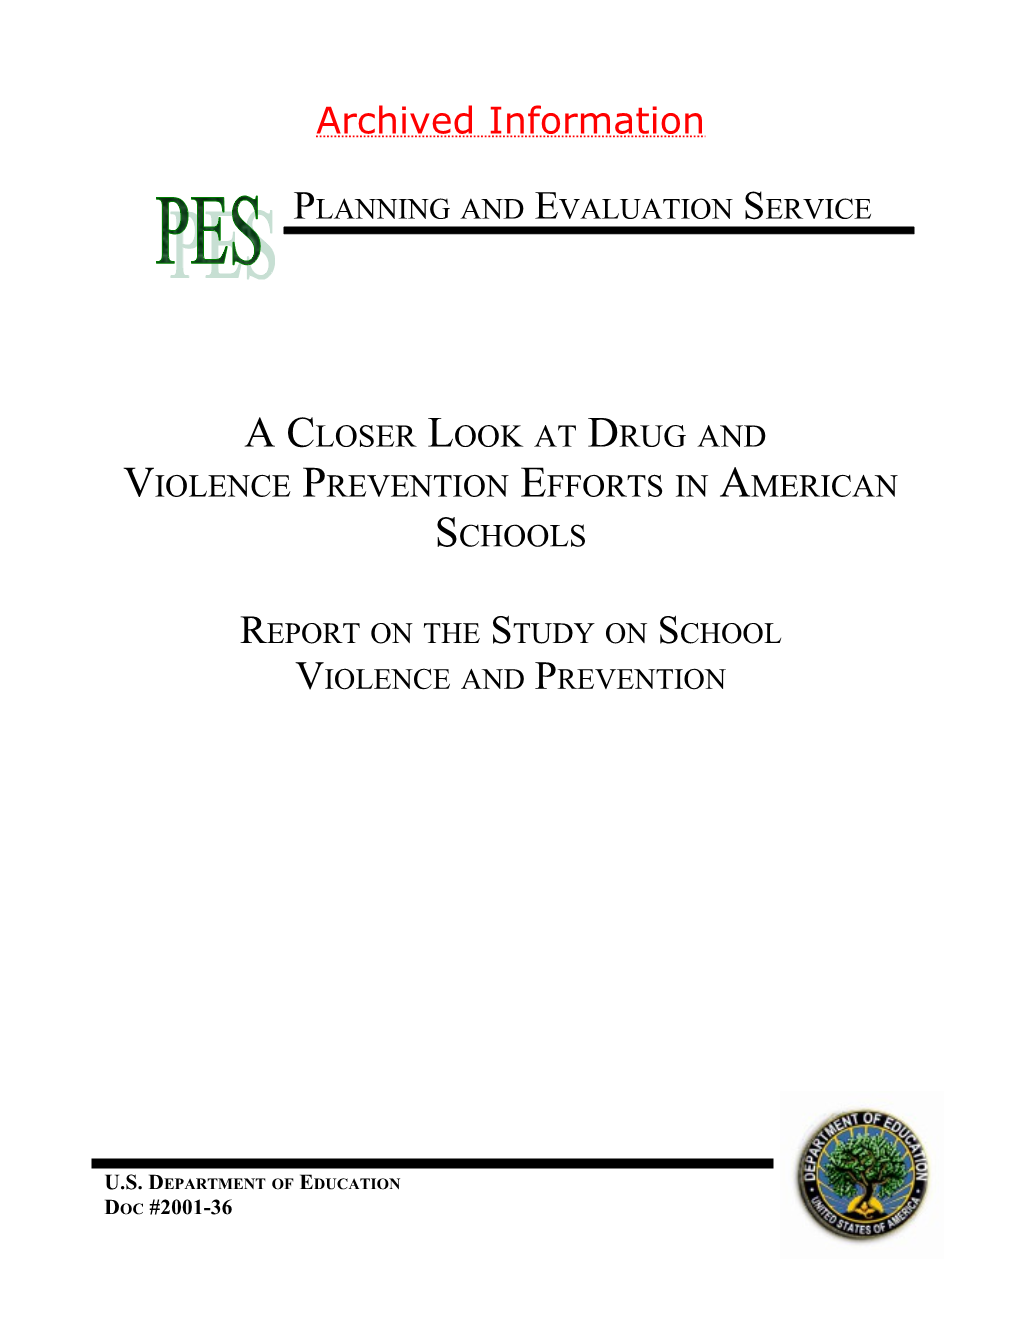 Archived: Report on the Study on School Violence and Prevention -EXEC SUMMARY